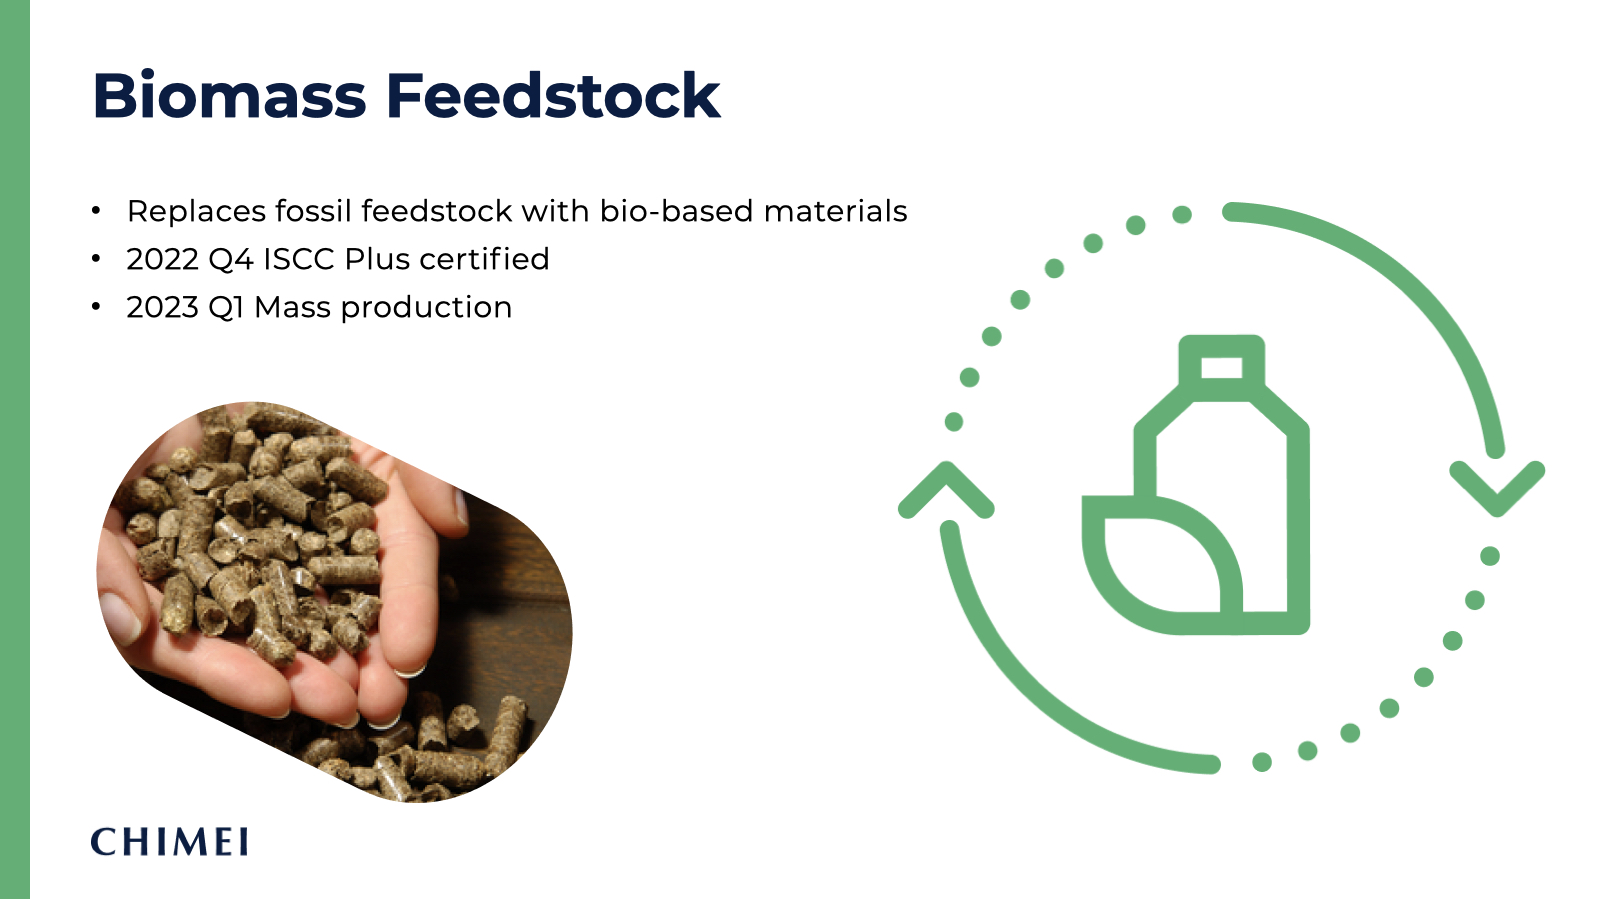 CHIMEI is preparing to replace some of the fossil feedstock used in its polymer production with bio-based feedstock. They are tracking this renewable feedstock throughout their production line to comply with the ISCC PLUS mass balance approach, and building partnerships to ensure a greener value chain.